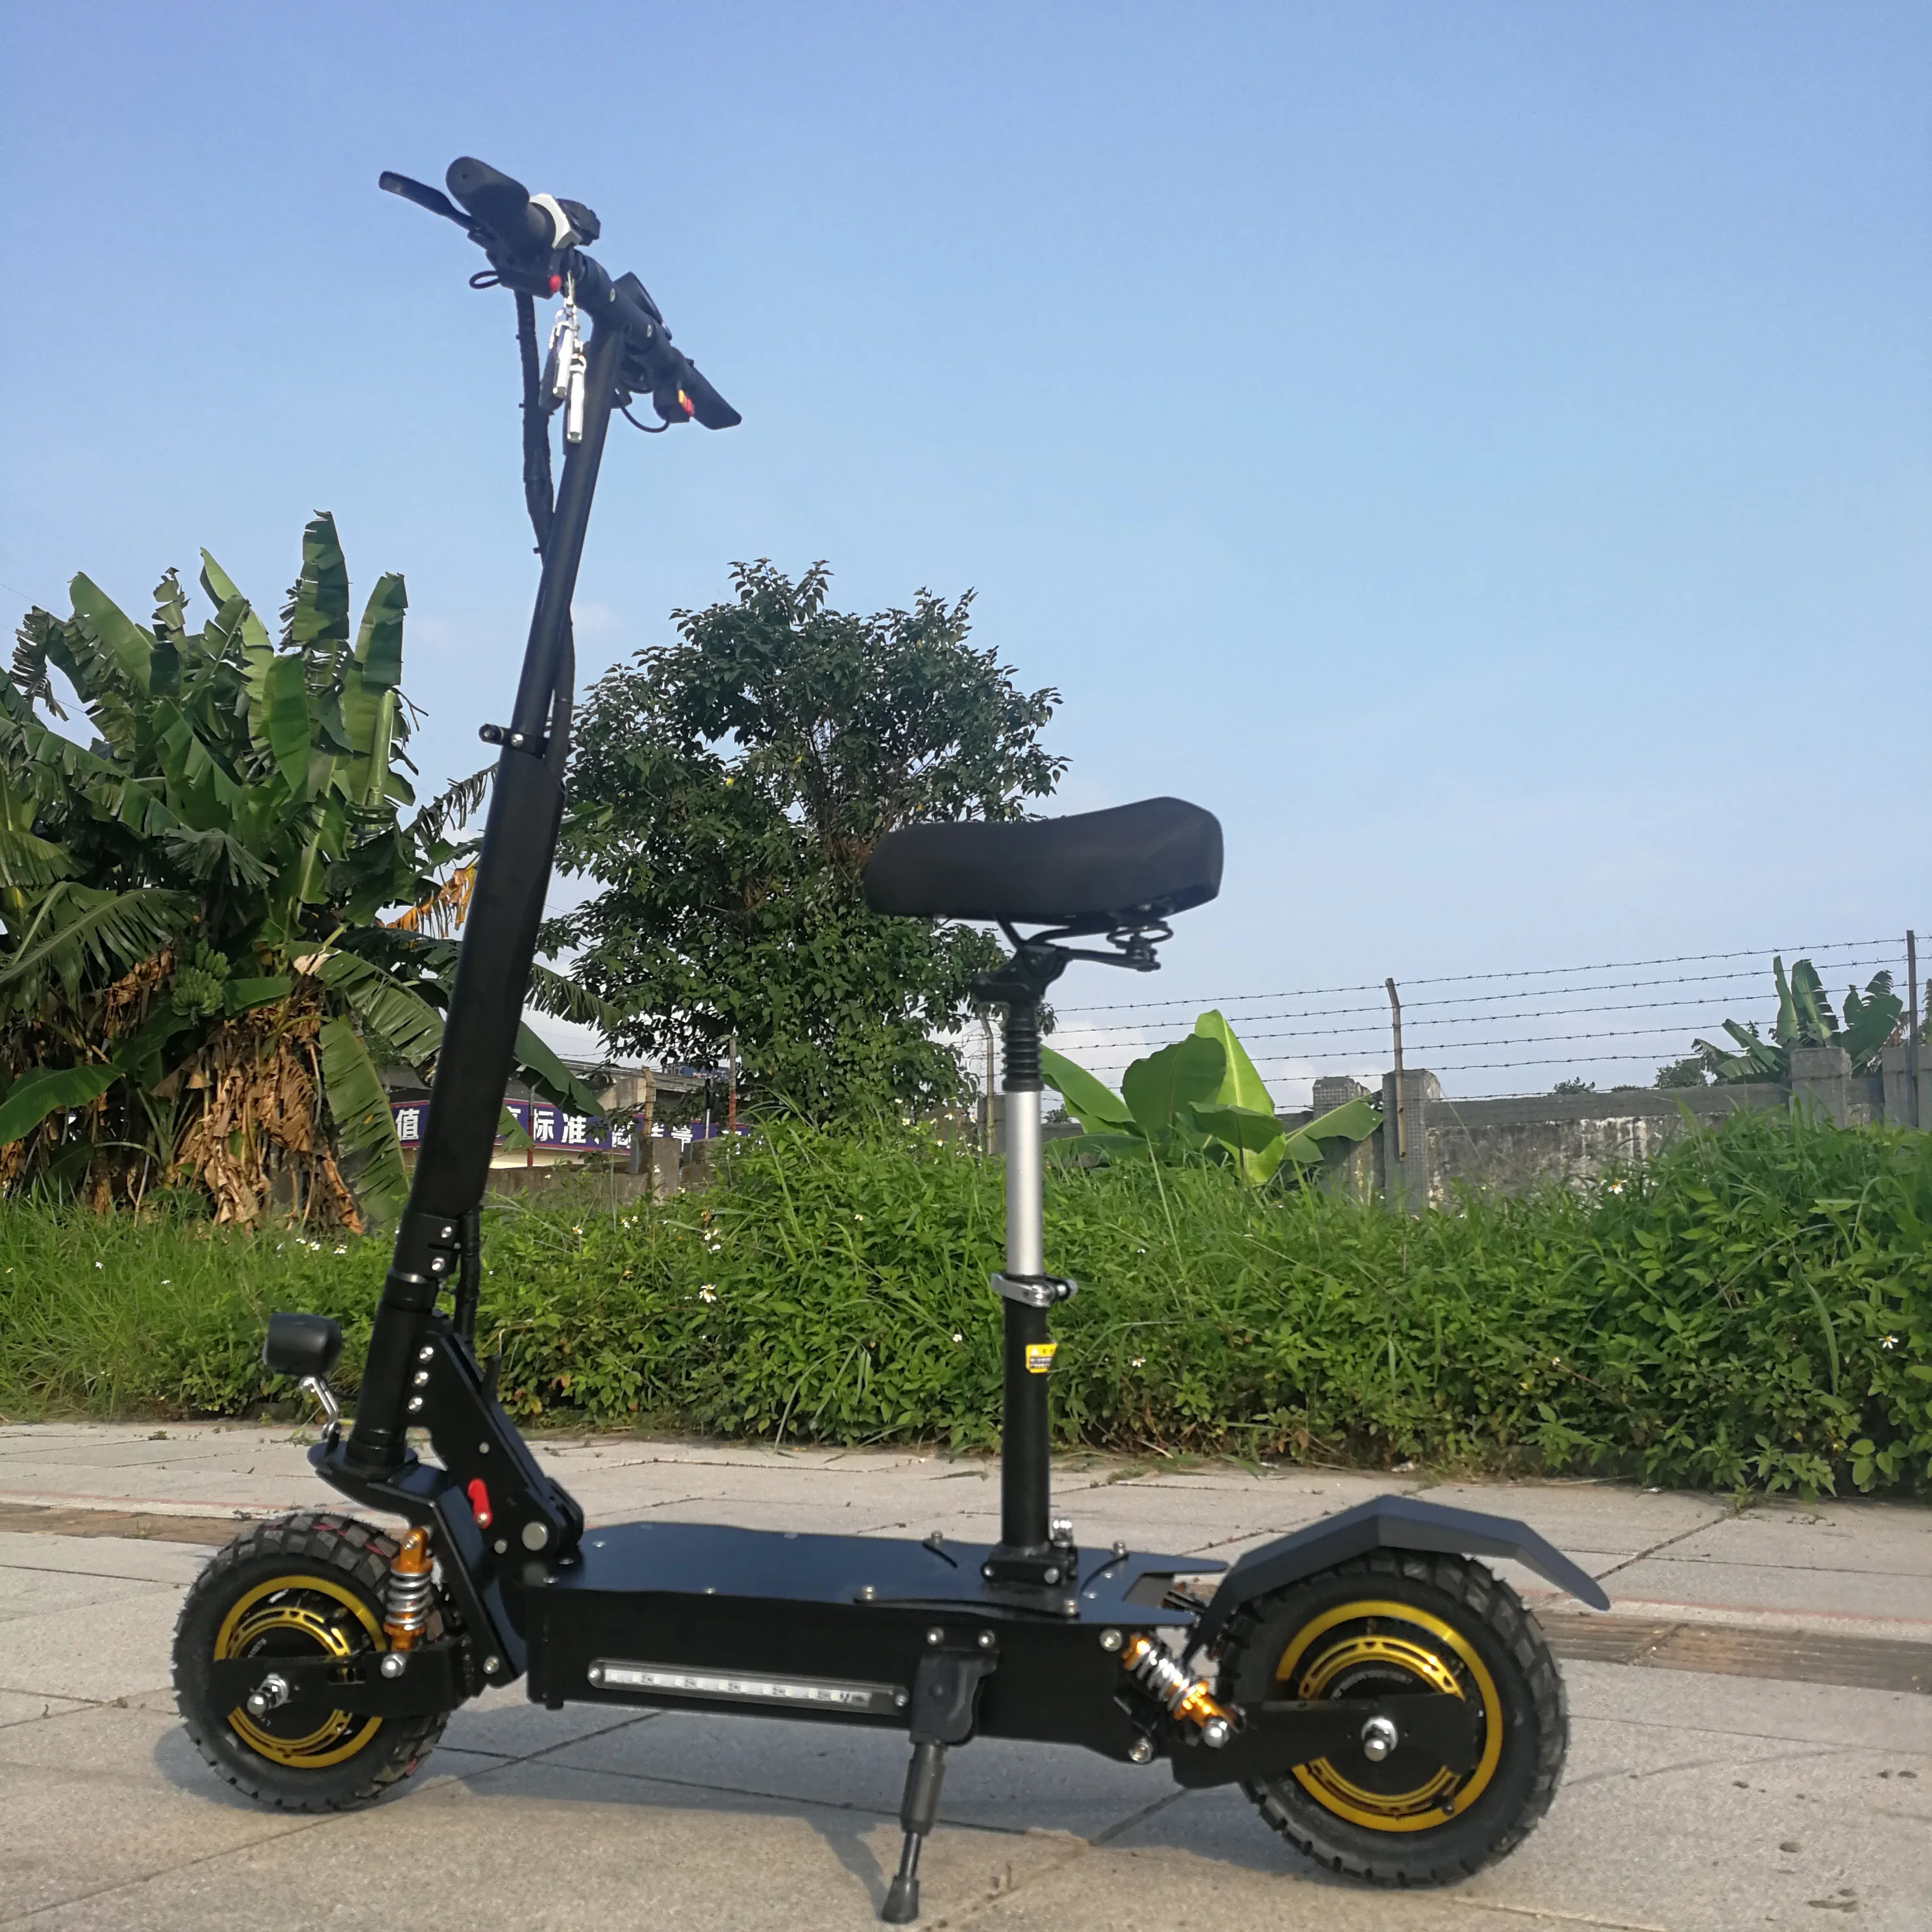 

VICSOUND 2019 Popular Selling Electric Scooter Sharing 10 inch 60V 2000W With Seat Optional, Black